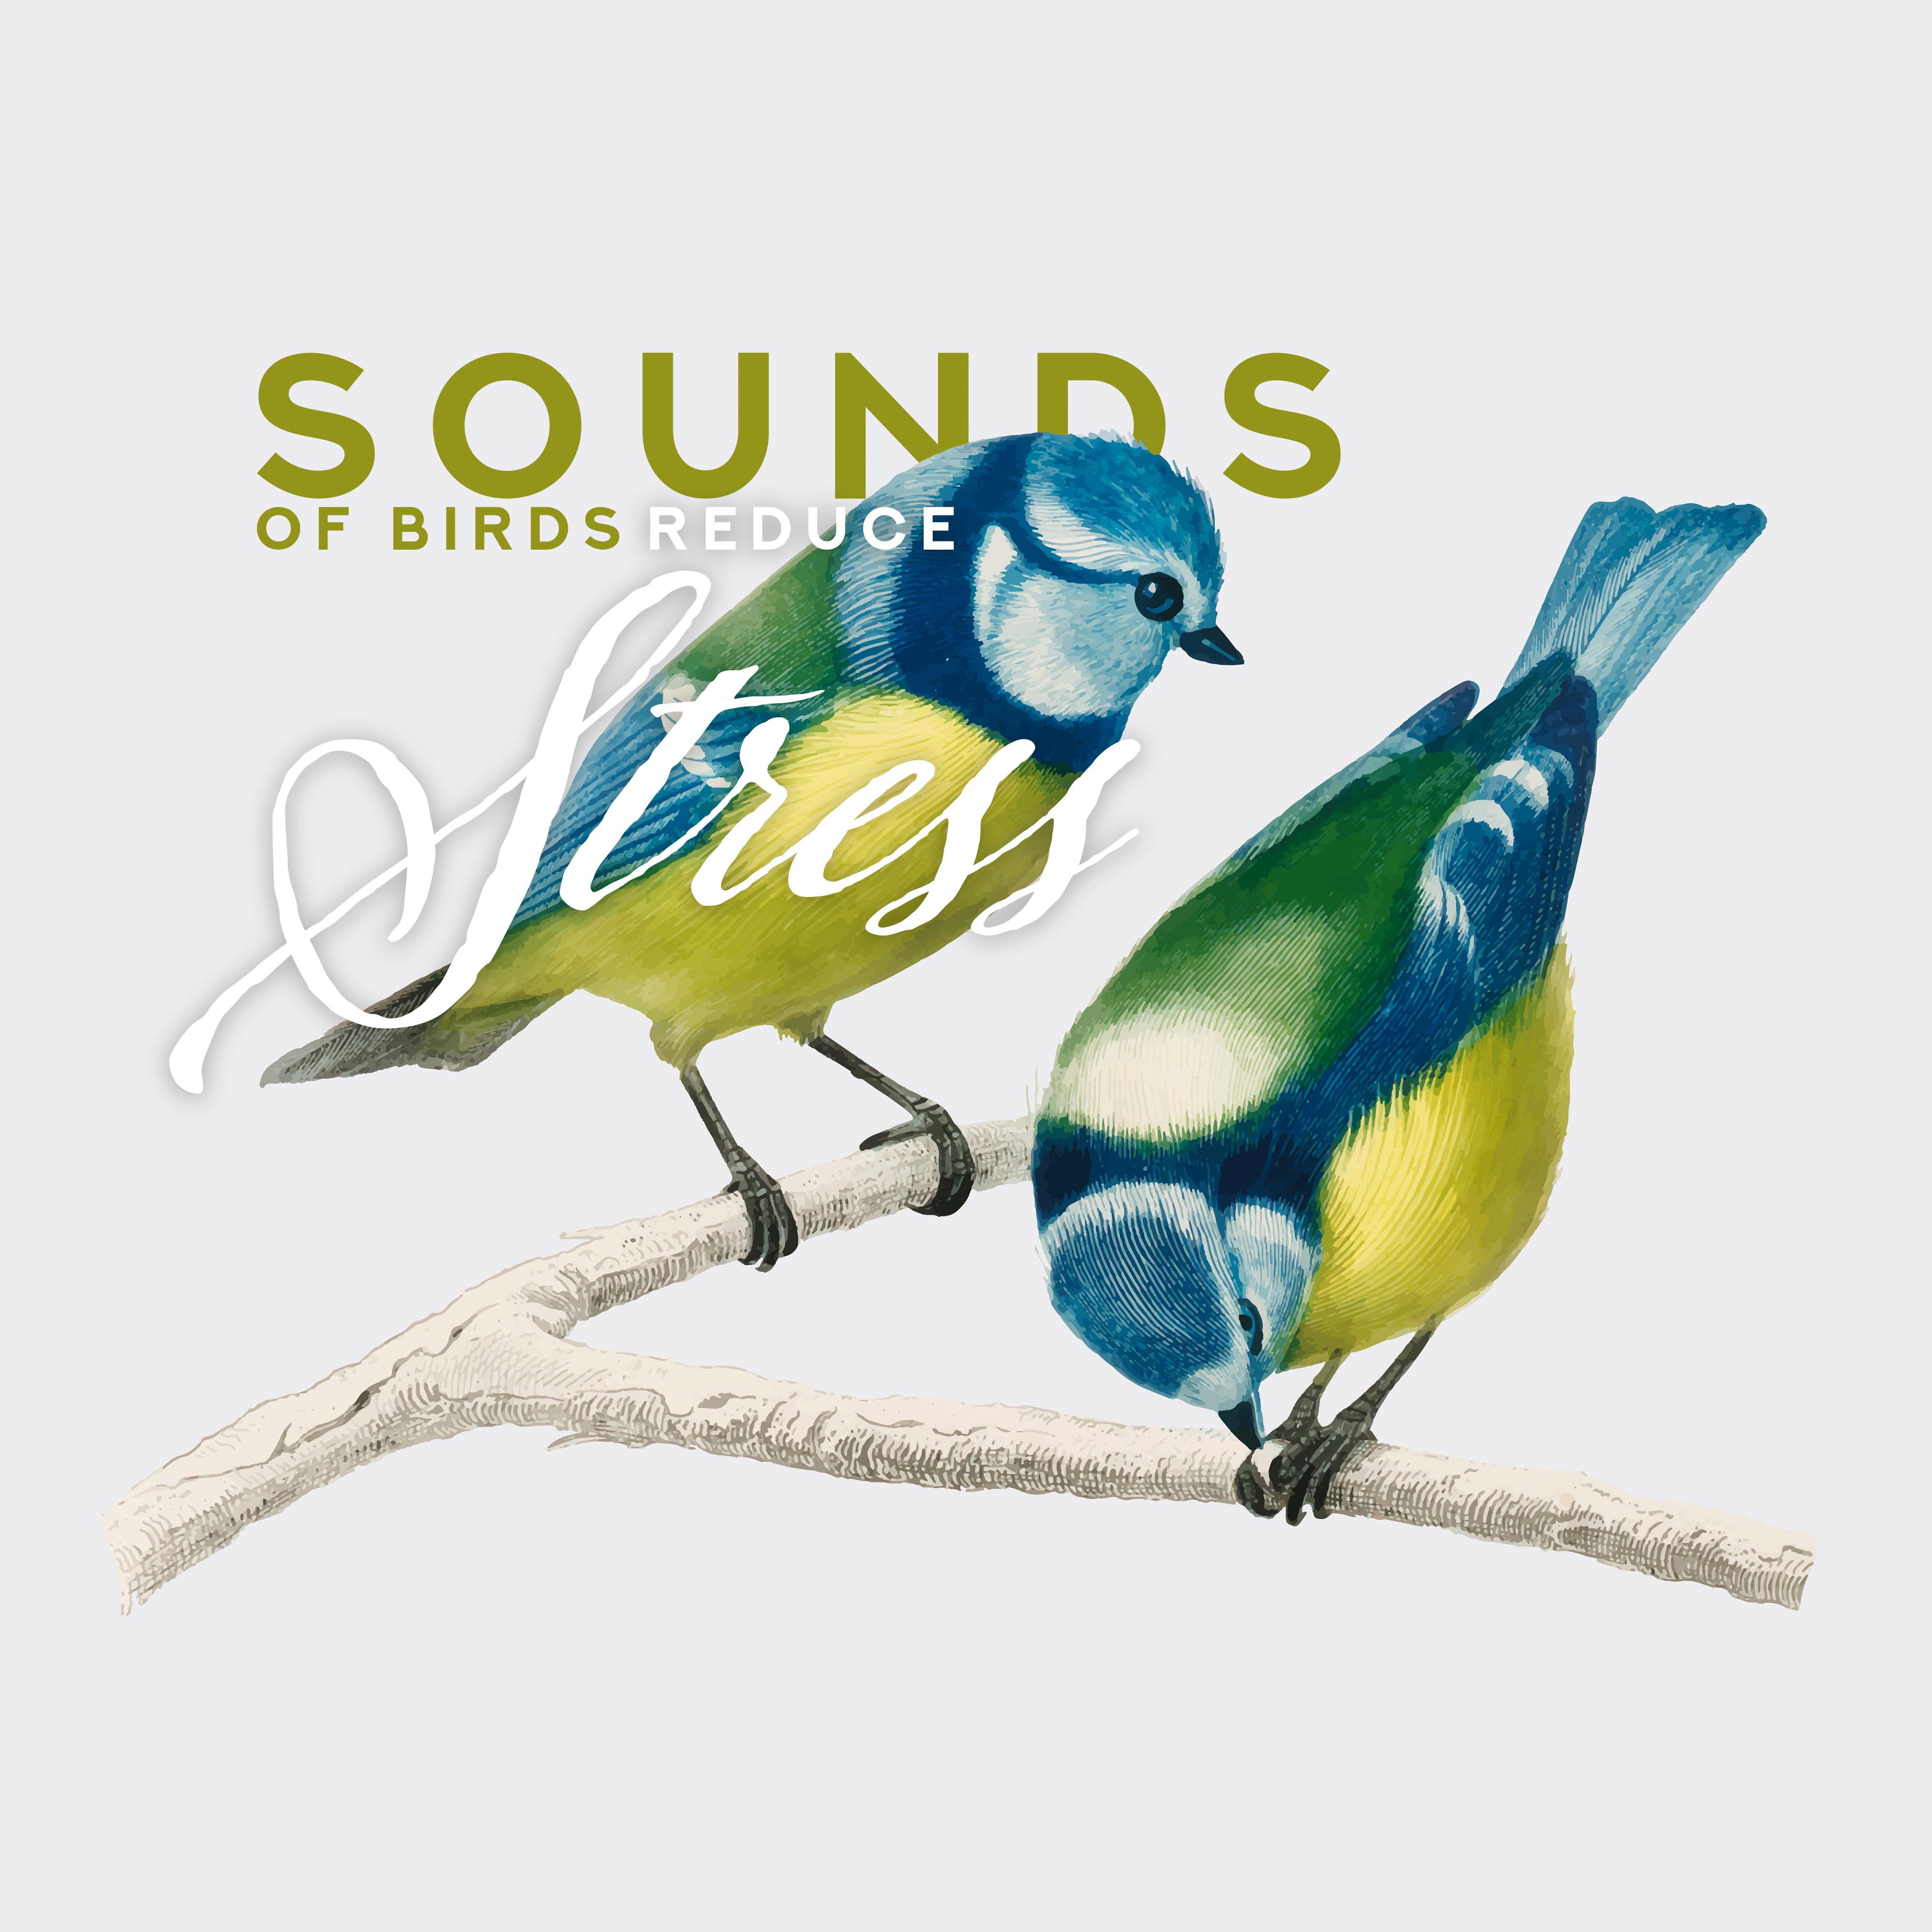 Sounds of Birds Reduce Stress: Relaxing Music Therapy, Pure Mind, Nature Sounds for Relaxation & Rest, Deep Meditation, Zen Serenity